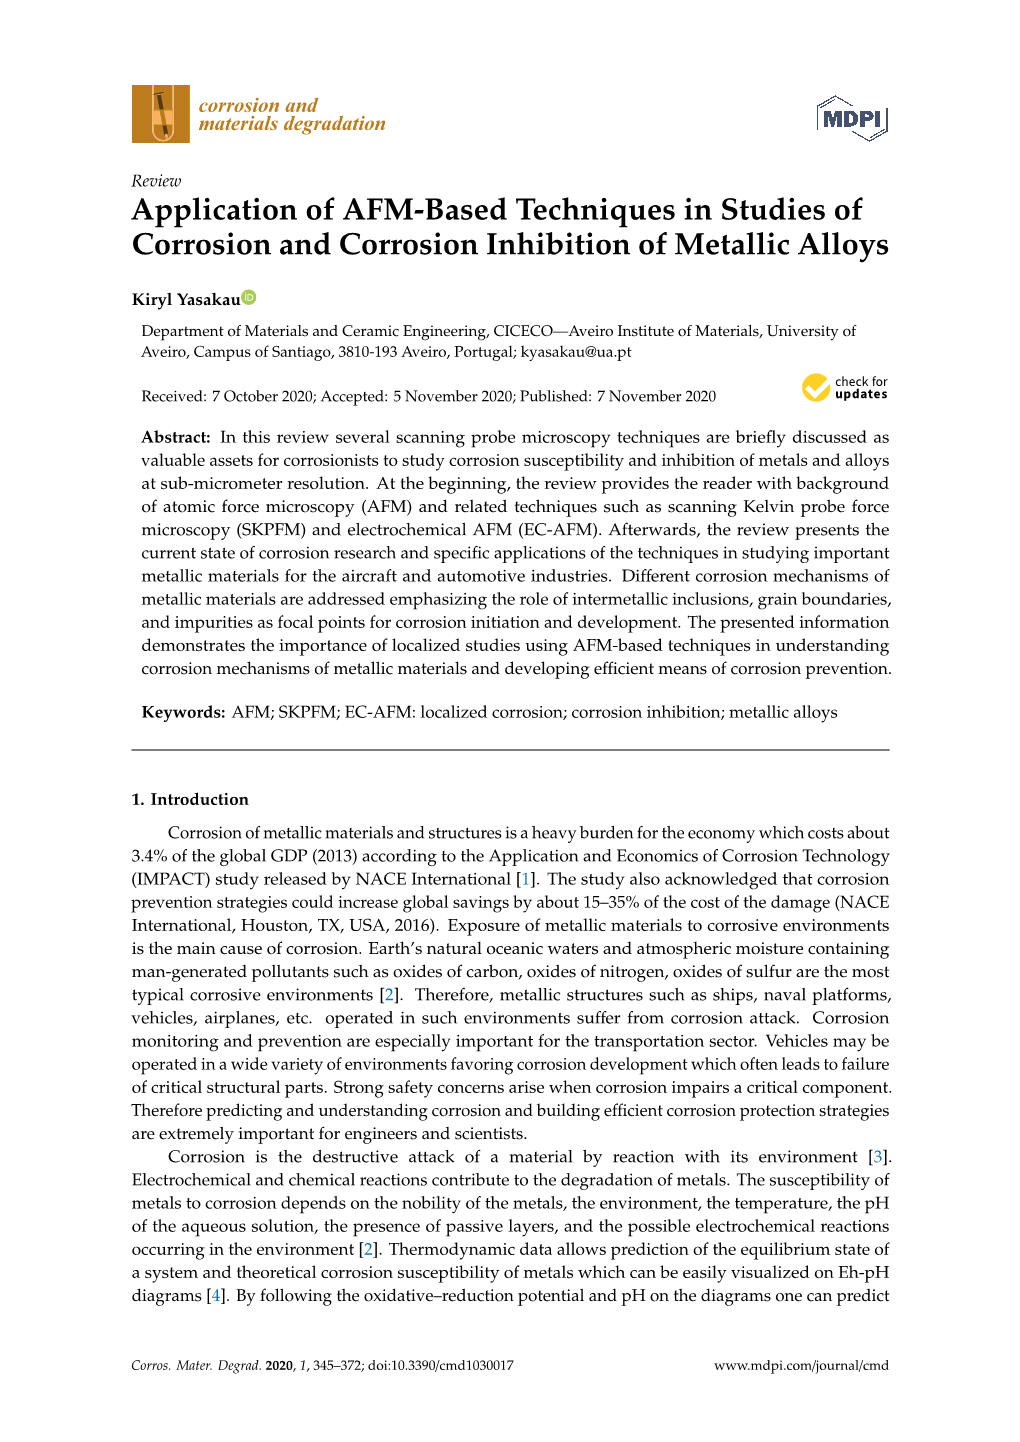 Application of AFM-Based Techniques in Studies of Corrosion and Corrosion Inhibition of Metallic Alloys